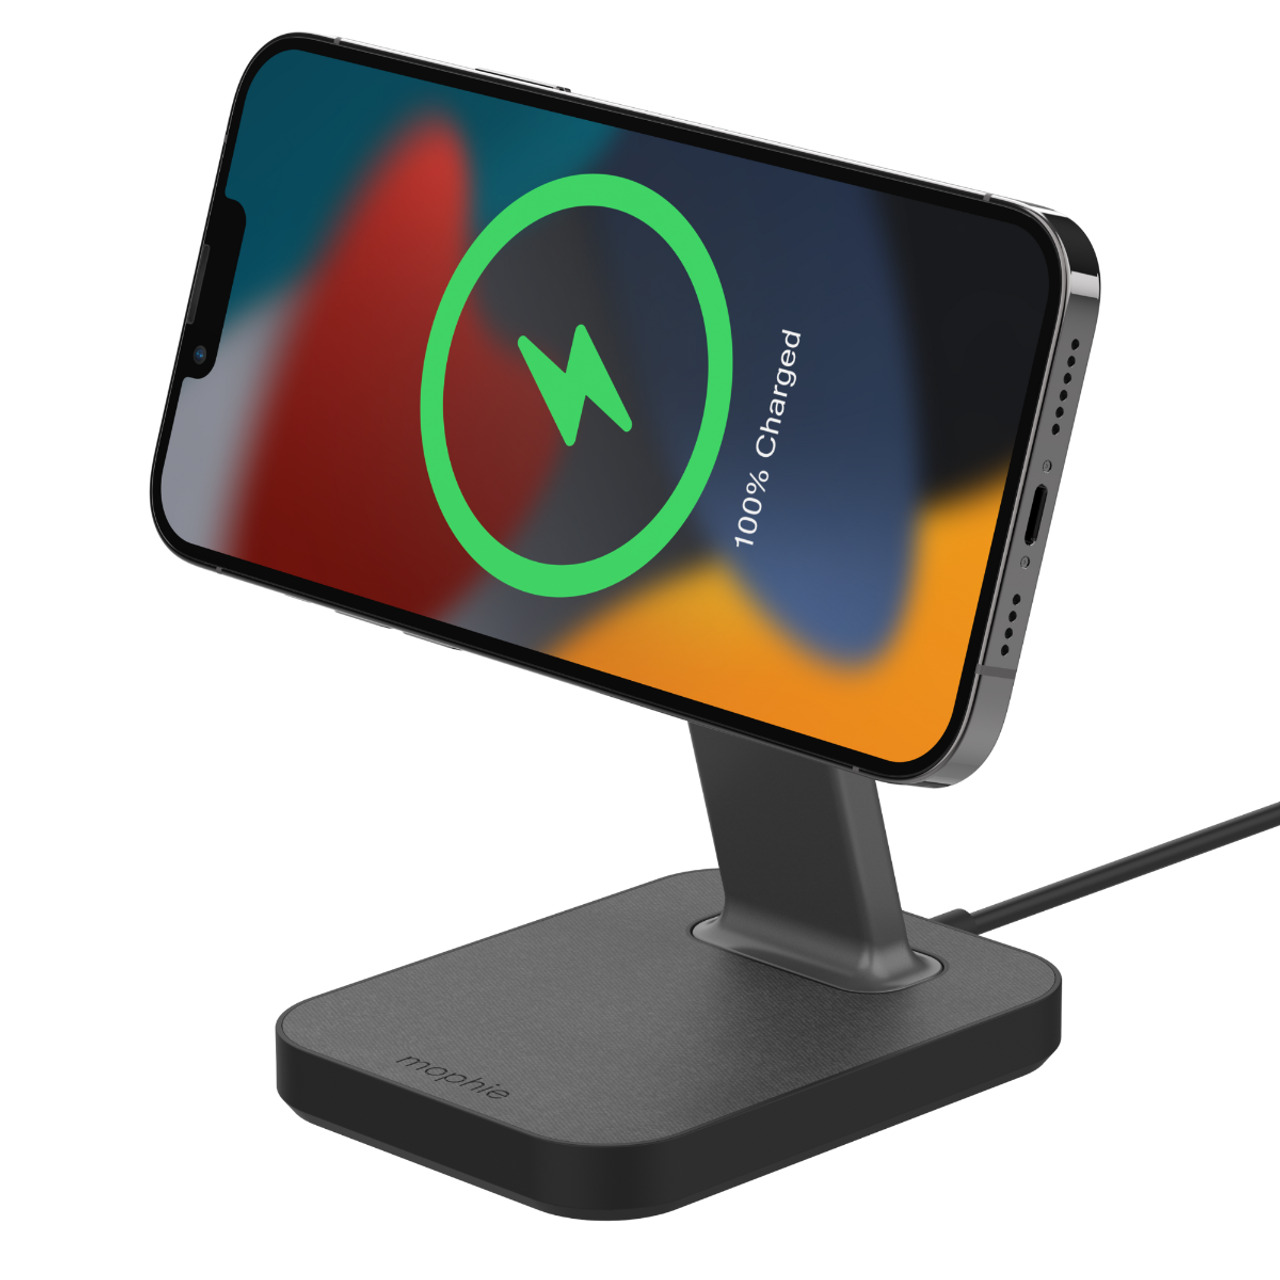 Mophie Snap+ MagSafe Compatible 15W Wireless Charger Stand